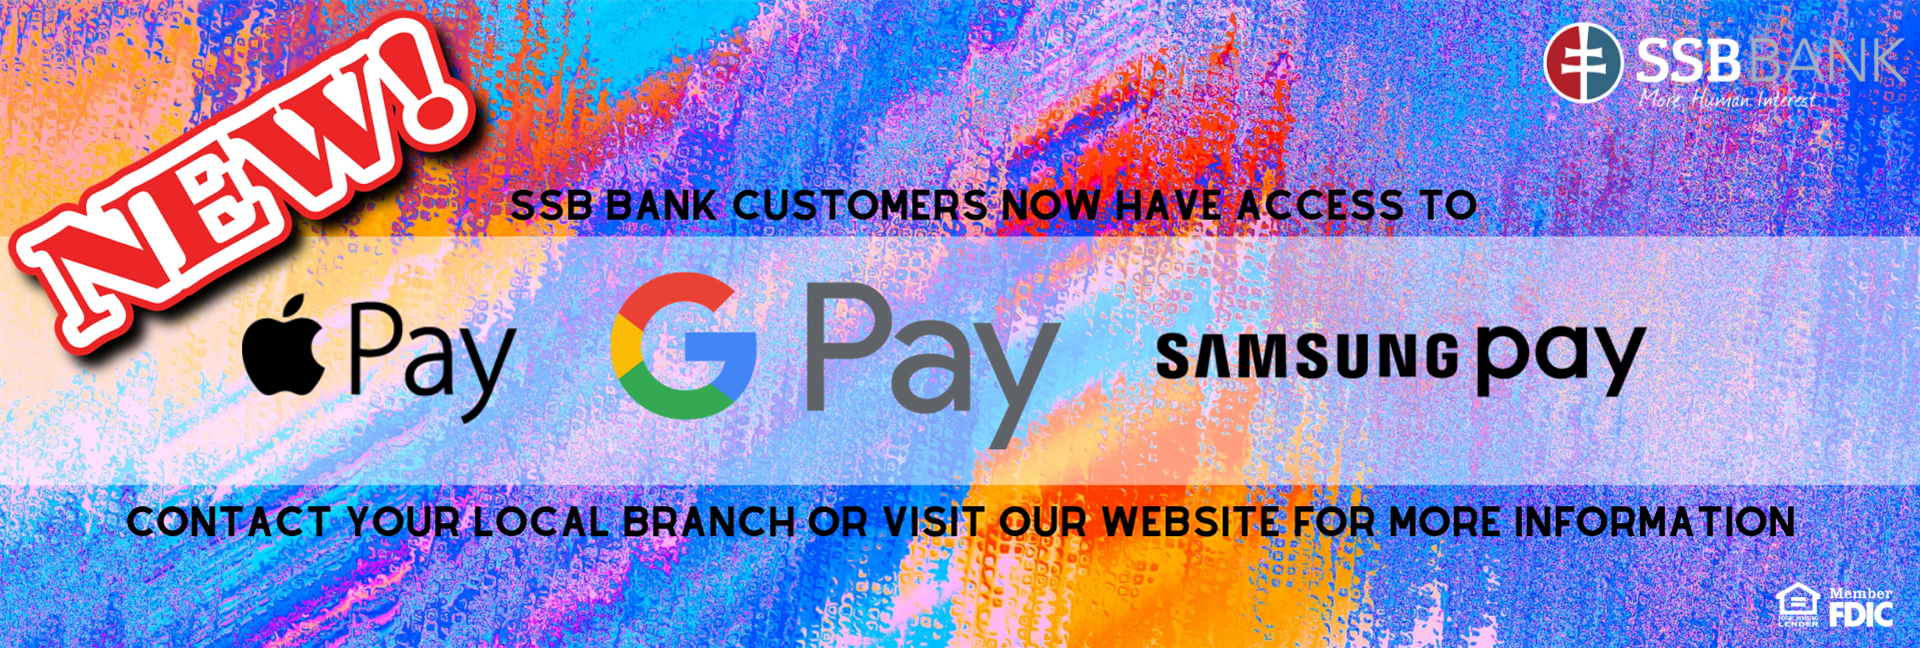 ssb bank offers apple pay, google pay, samsung pay